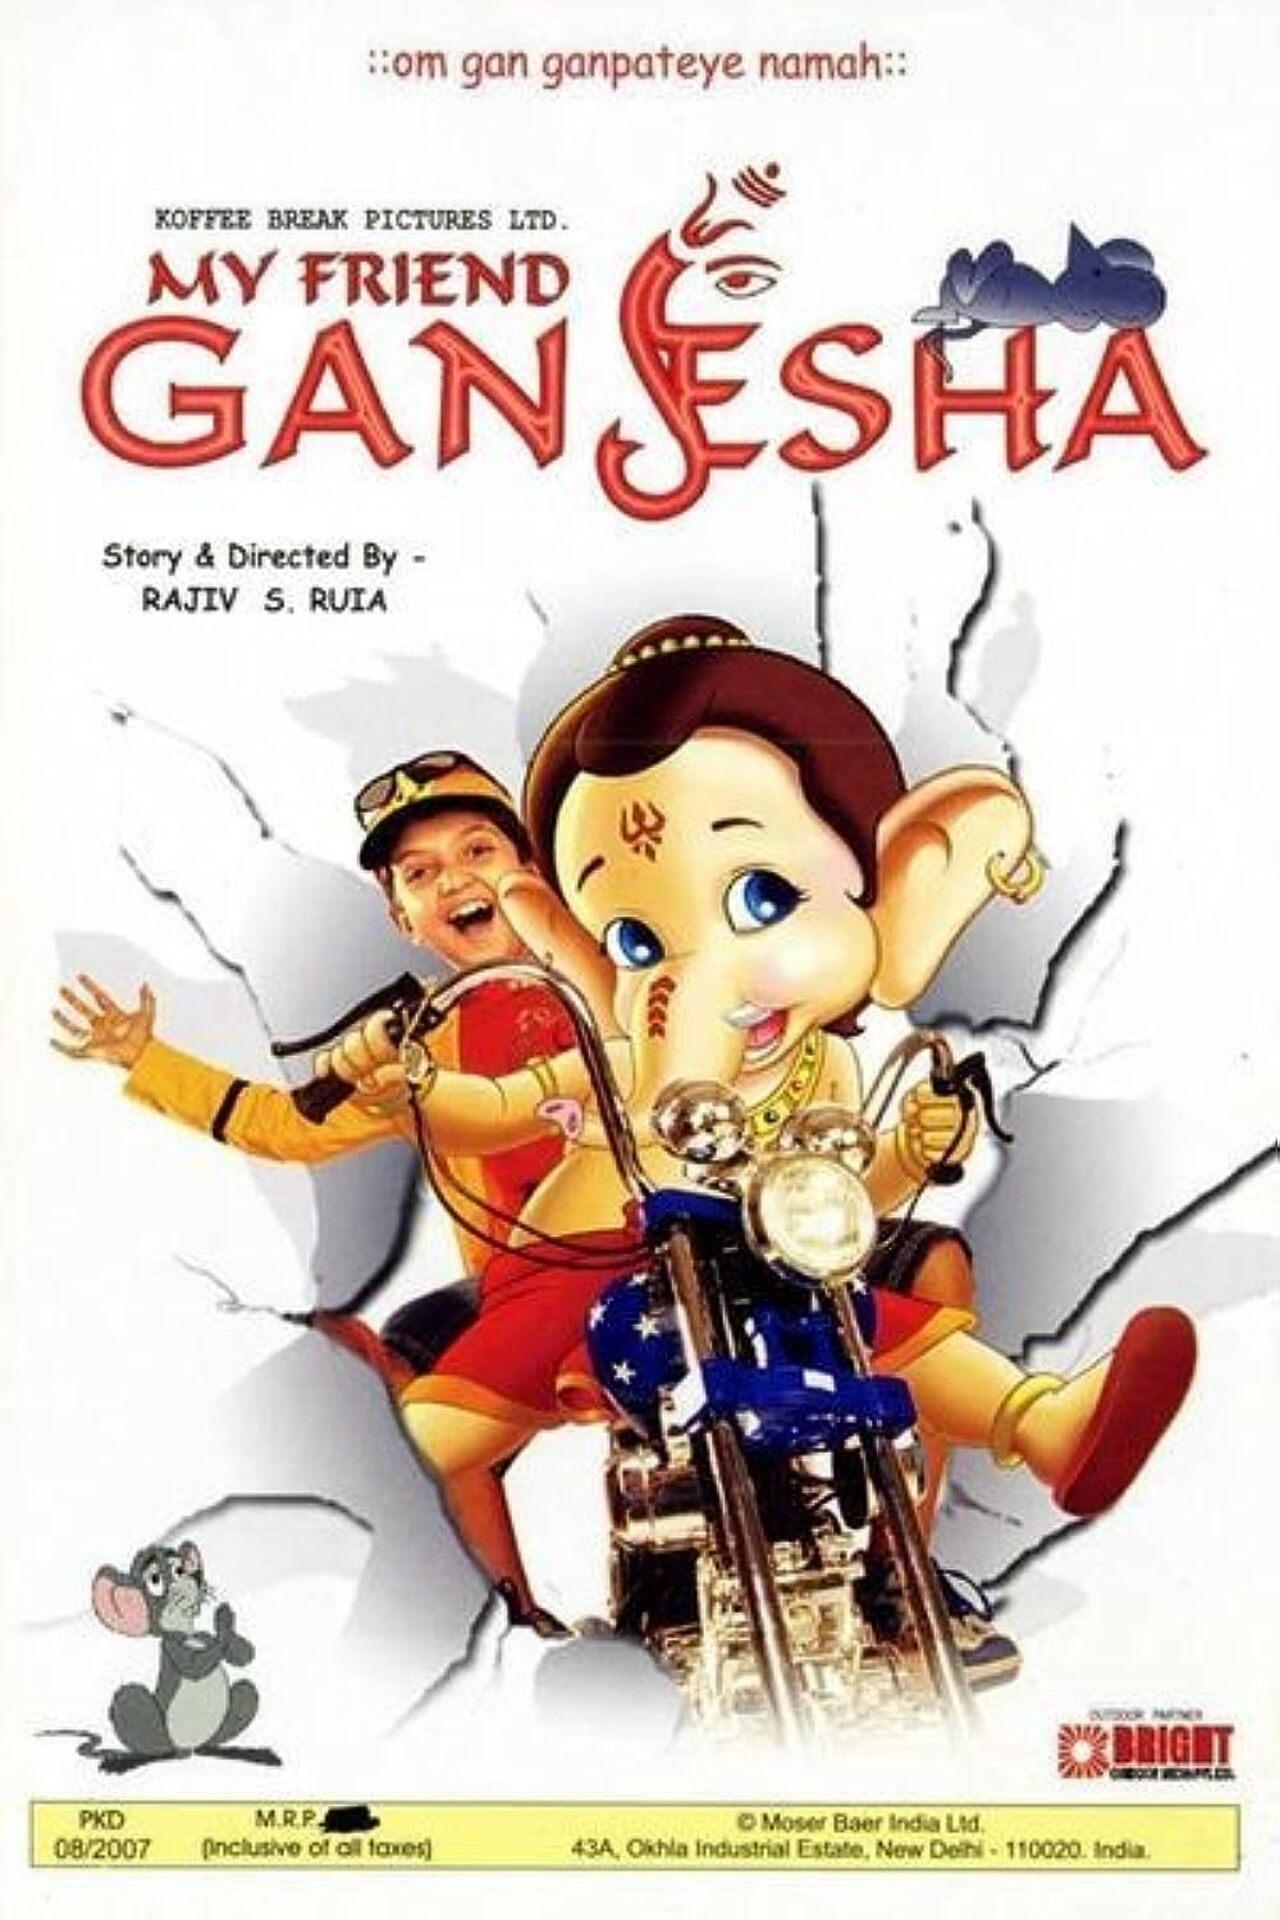 'My Friend Ganesha' is a heartwarming Bollywood film that beautifully blends the innocence of childhood with the divine presence of Lord Ganesha. This enchanting tale follows the adventures of an imaginative young boy named Kanhu, who befriends an endearing idol of Ganesha